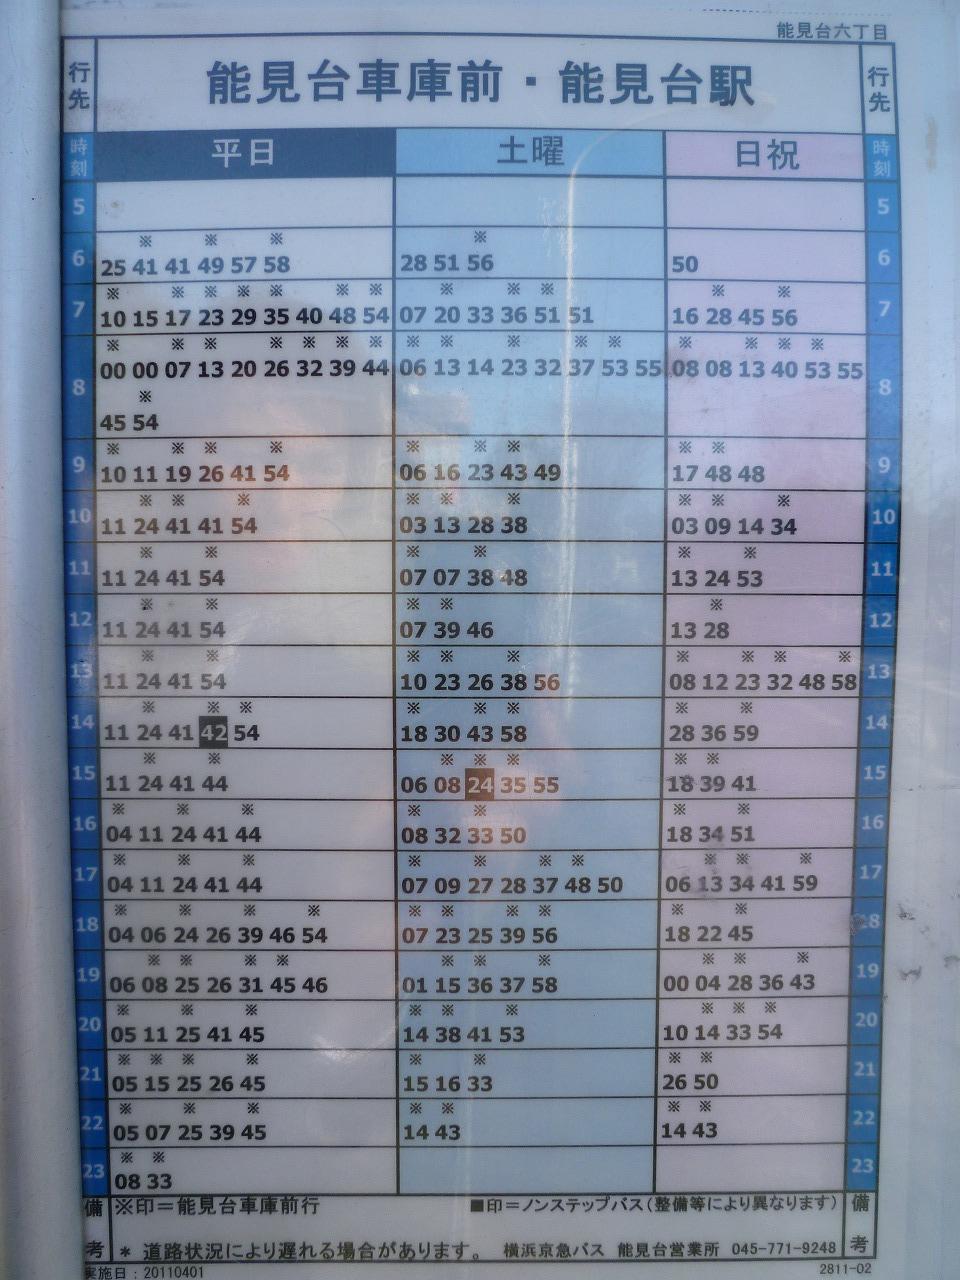 Other. Noukendai flights time table